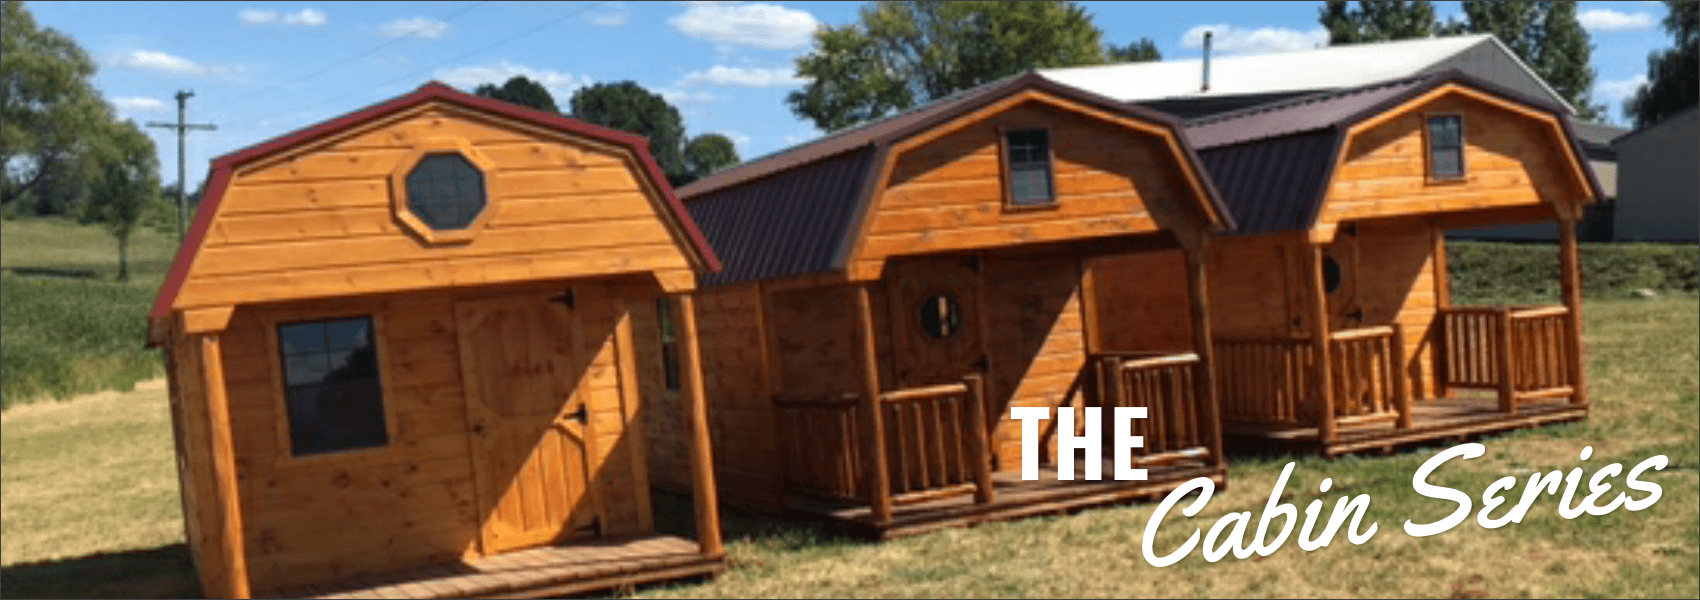 Storage Sheds, Barns, Buildings | Mid Valley Structures